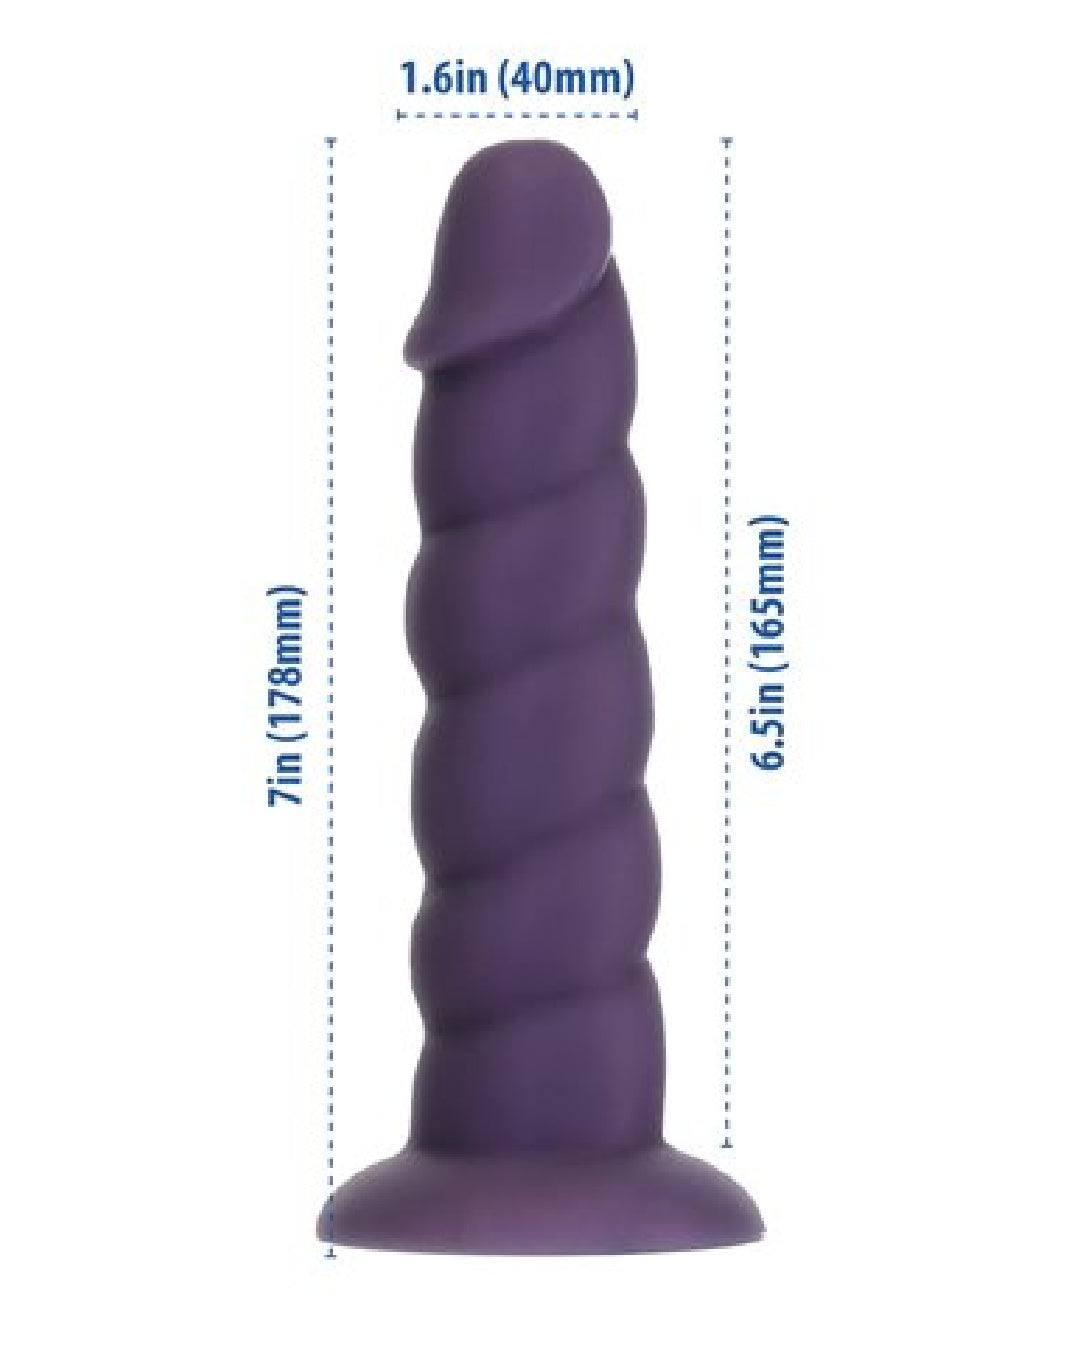 Fantasy Purple Unicorn Horn 7 Inch Silicone Dildo with the measurements on a white background